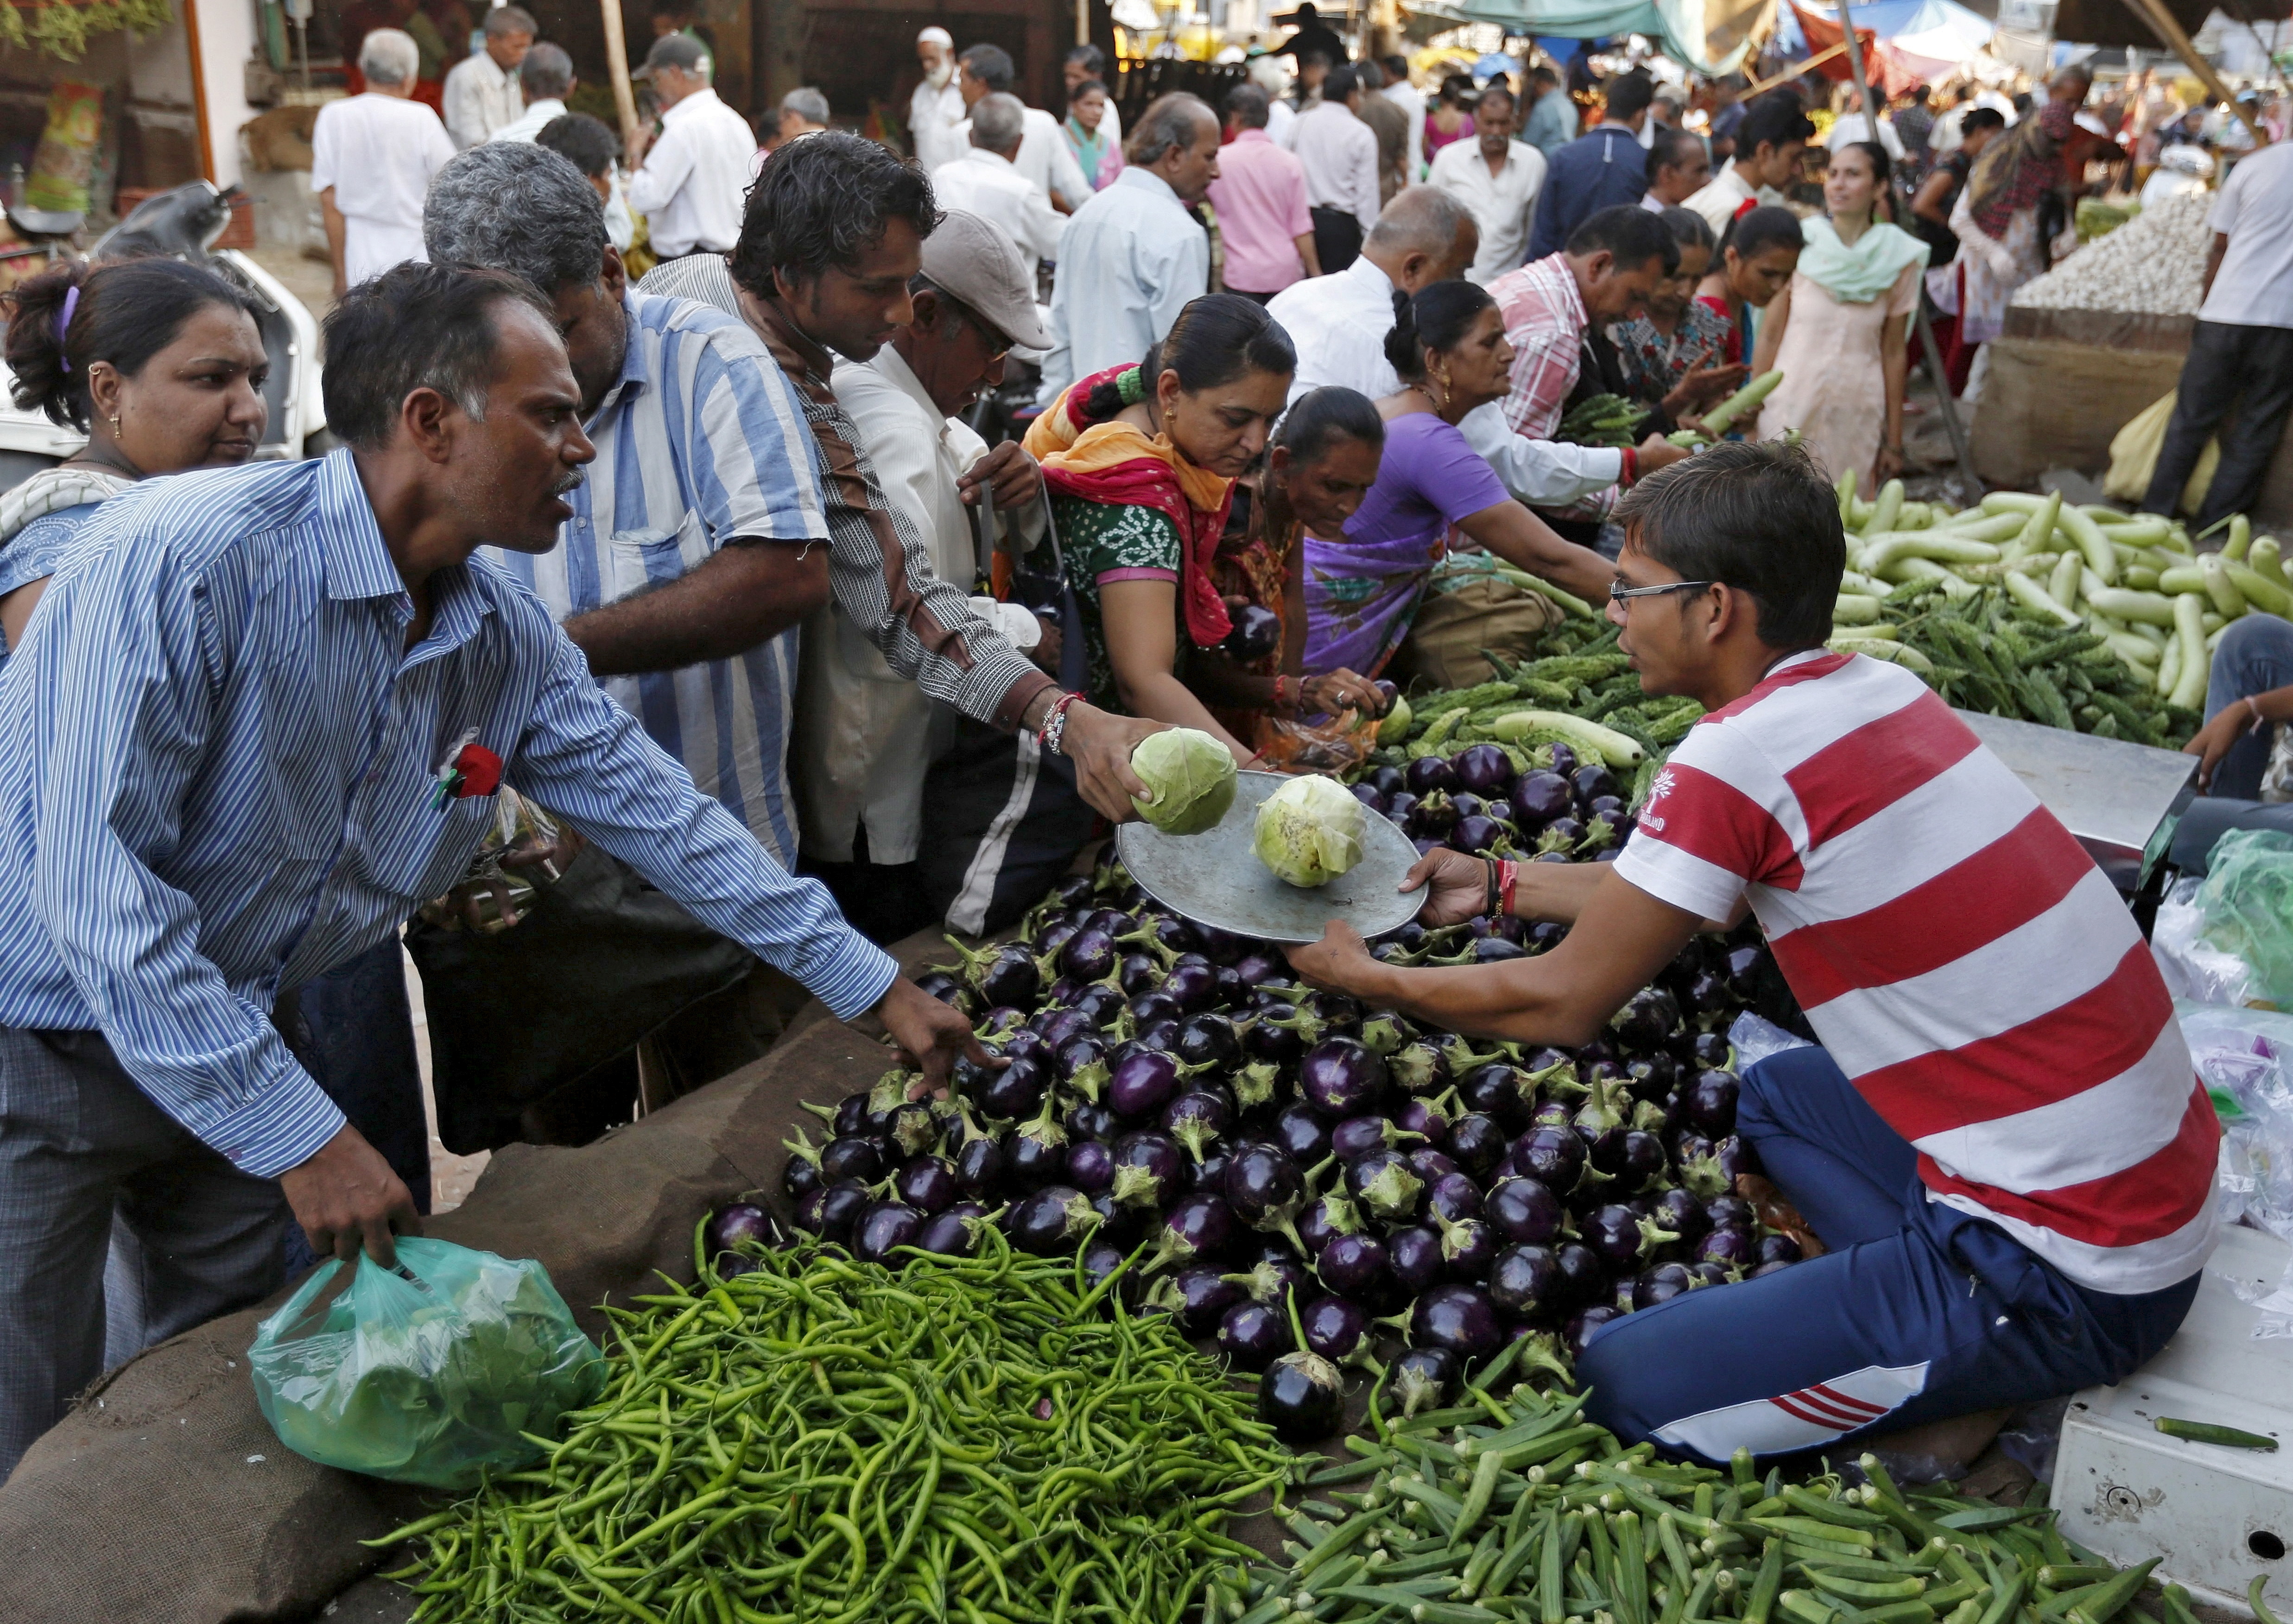 Customers buy vegetables at a market in Ahmedabad